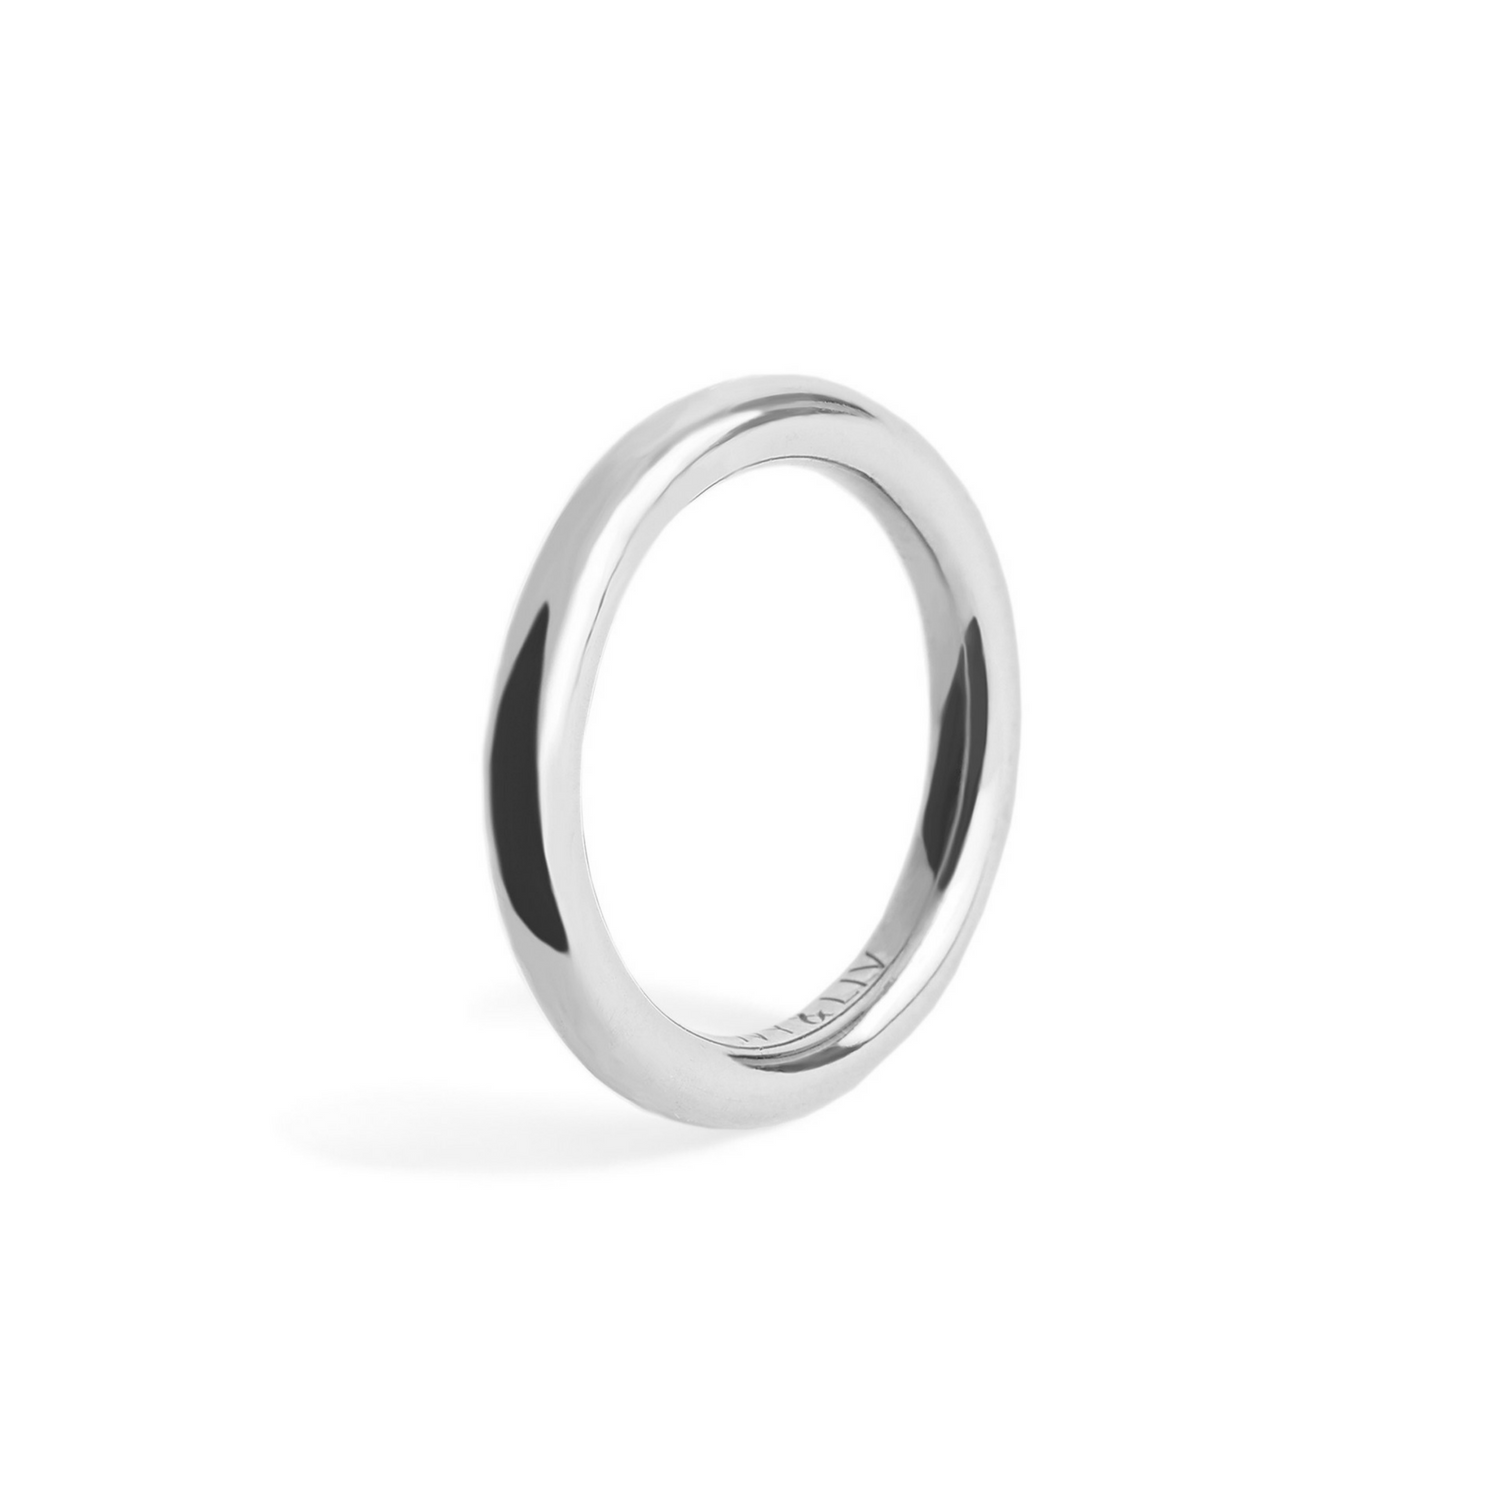 Elementary Ring 3.0 silver